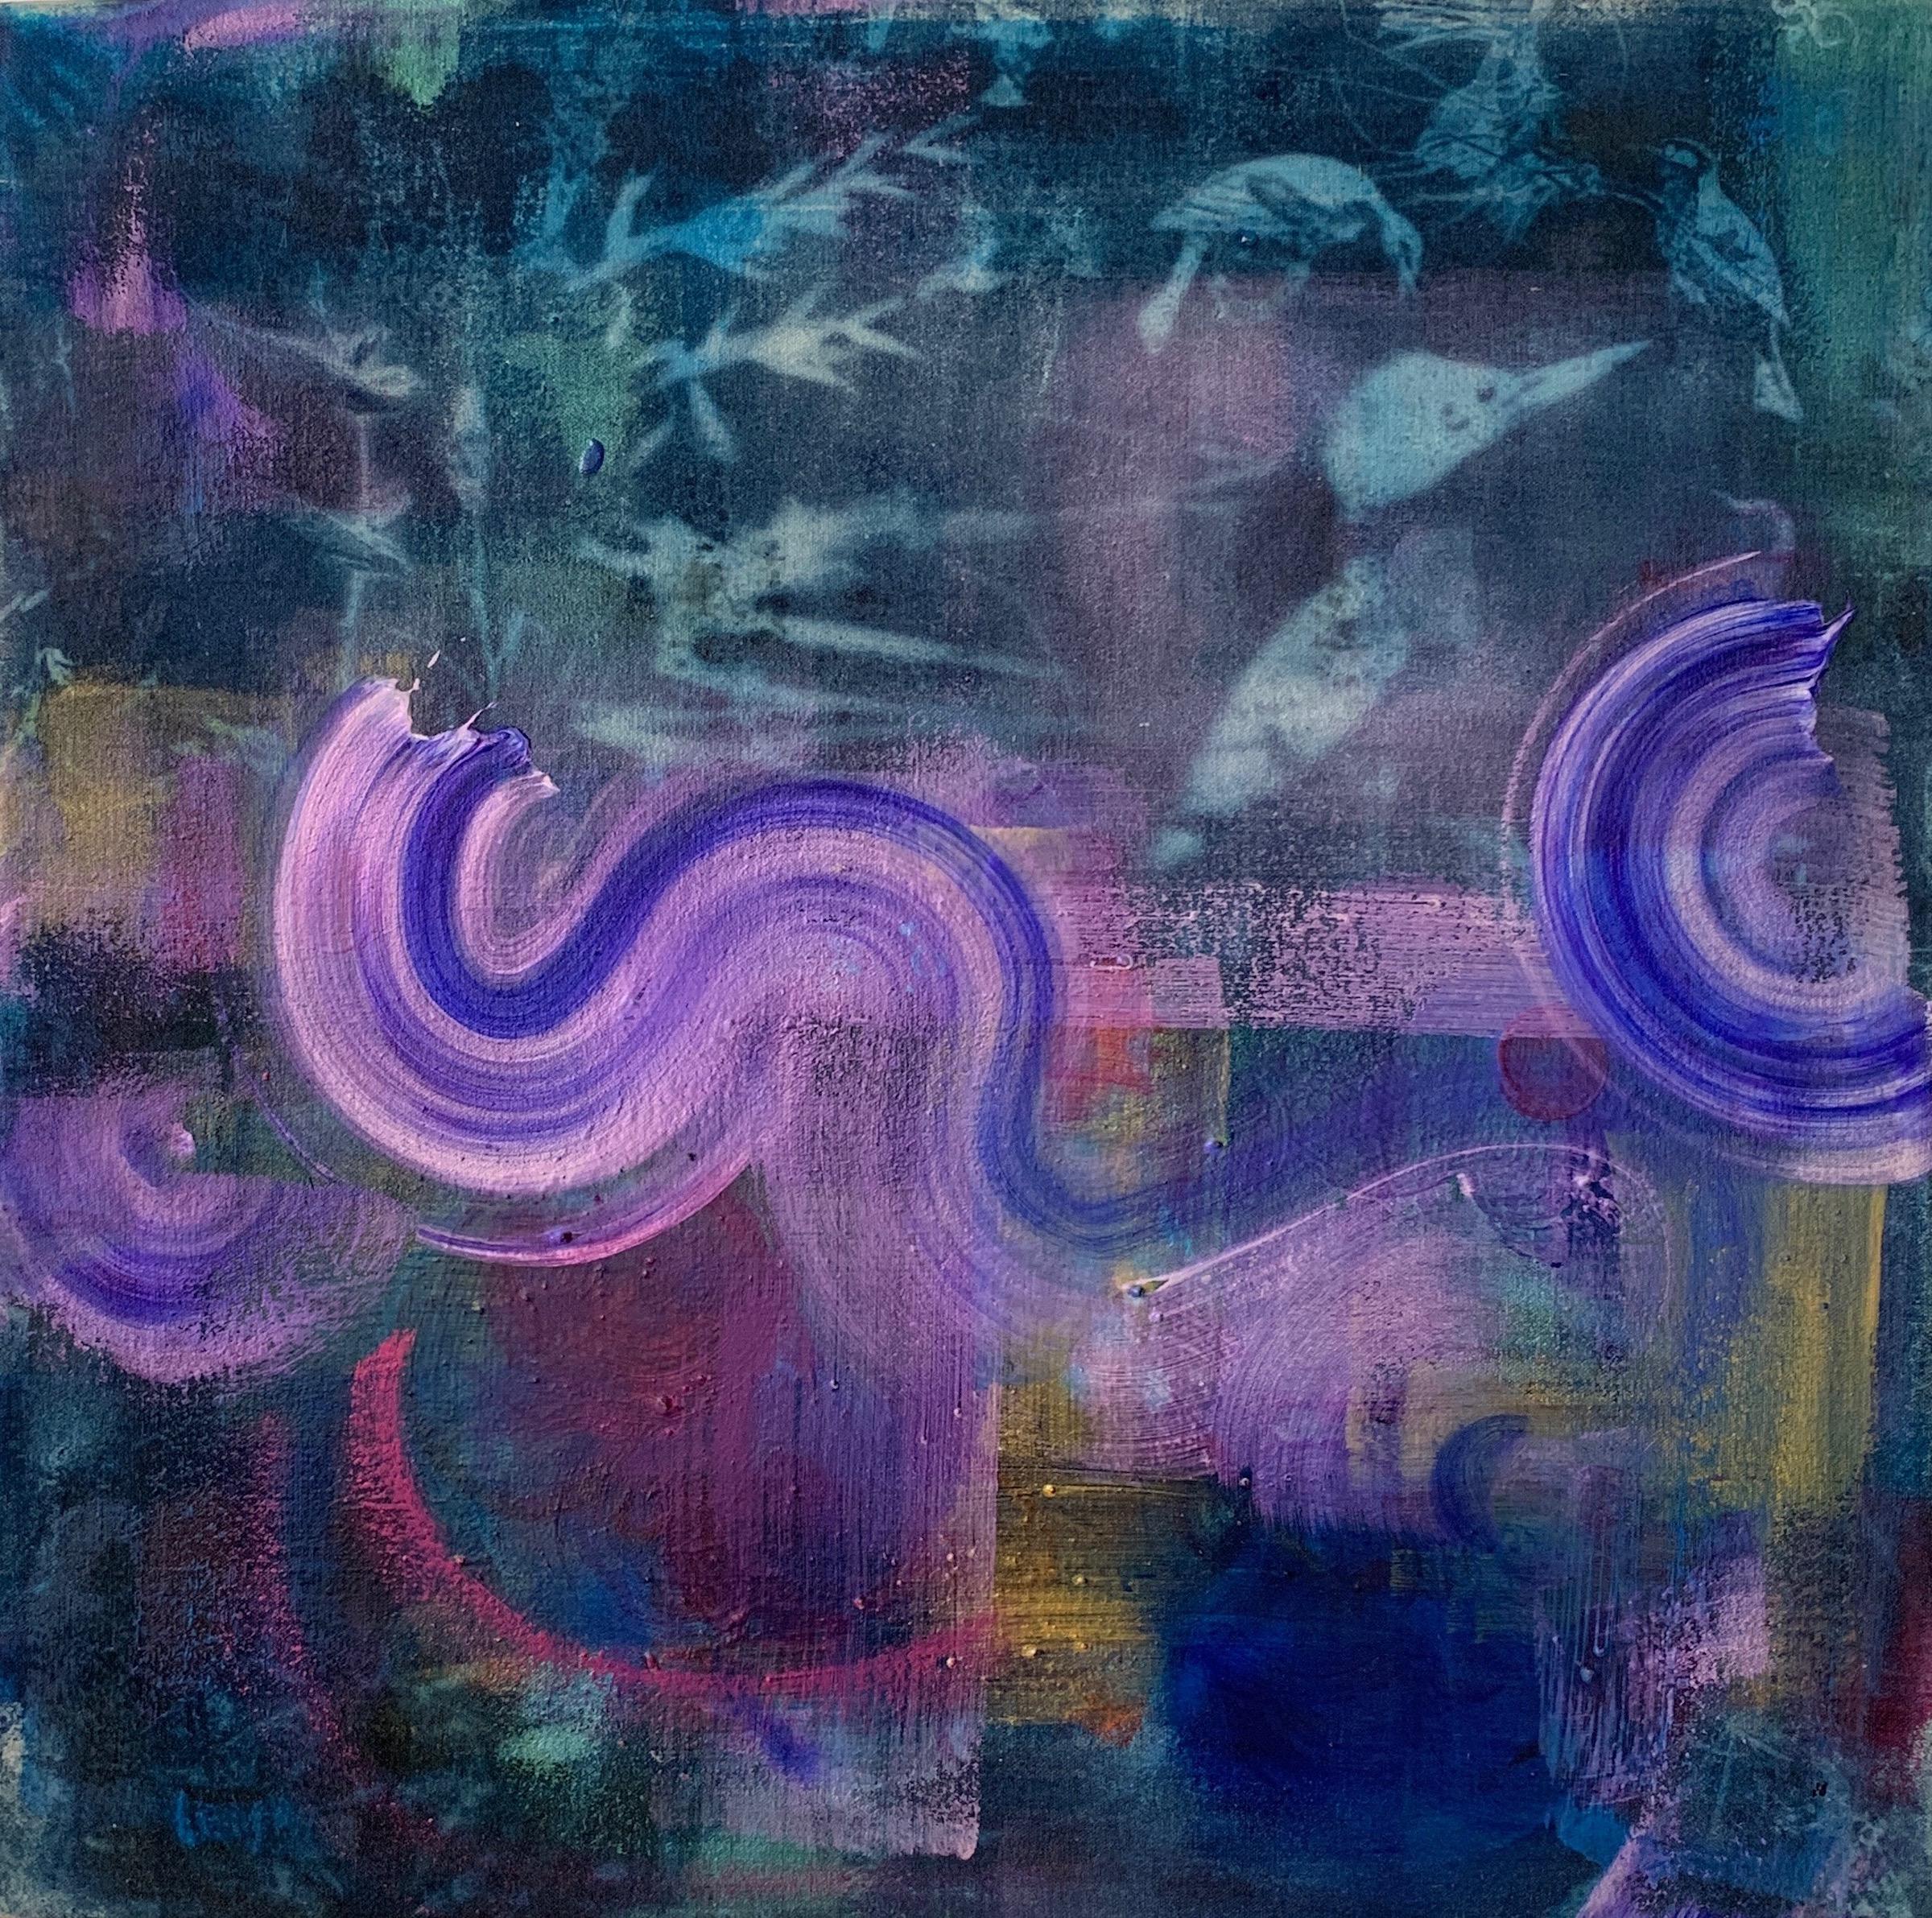 Peggy Cyphers Abstract Painting - "Night Rain" 30"x30" cyanotype, paint on canvas, abstract painting